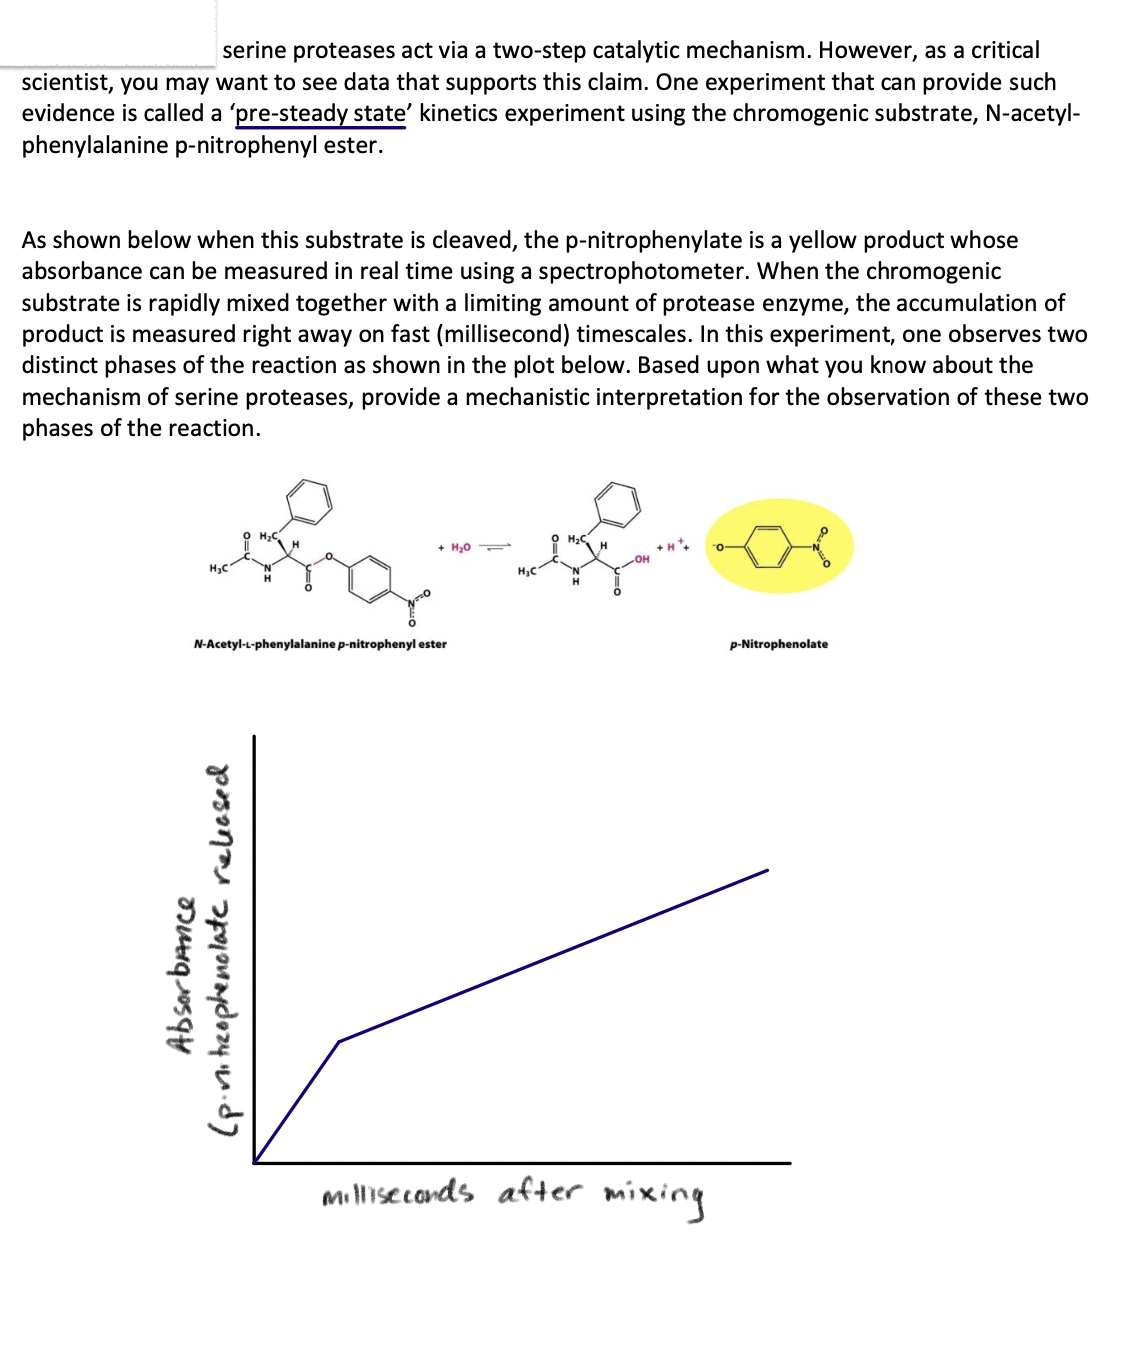 serine proteases act via a two-step catalytic mechanism. However, as a critical
scientist, you may want to see data that supports this claim. One experiment that can provide such
evidence is called a 'pre-steady state' kinetics experiment using the chromogenic substrate, N-acetyl-
phenylalanine p-nitrophenyl ester.
As shown below when this substrate is cleaved, the p-nitrophenylate is a yellow product whose
absorbance can be measured in real time using a spectrophotometer. When the chromogenic
substrate is rapidly mixed together with a limiting amount of protease enzyme, the accumulation of
product is measured right away on fast (millisecond) timescales. In this experiment, one observes two
distinct phases of the reaction as shown in the plot below. Based upon what you know about the
mechanism of serine proteases, provide a mechanistic interpretation for the observation of these two
phases of the reaction.
+ H₂O
N-Acetyl-L-phenylalanine p-nitrophenyl ester
p-Nitrophenolate
Absorbance
(p.nitrophenolate released
milliseconds after
mixing